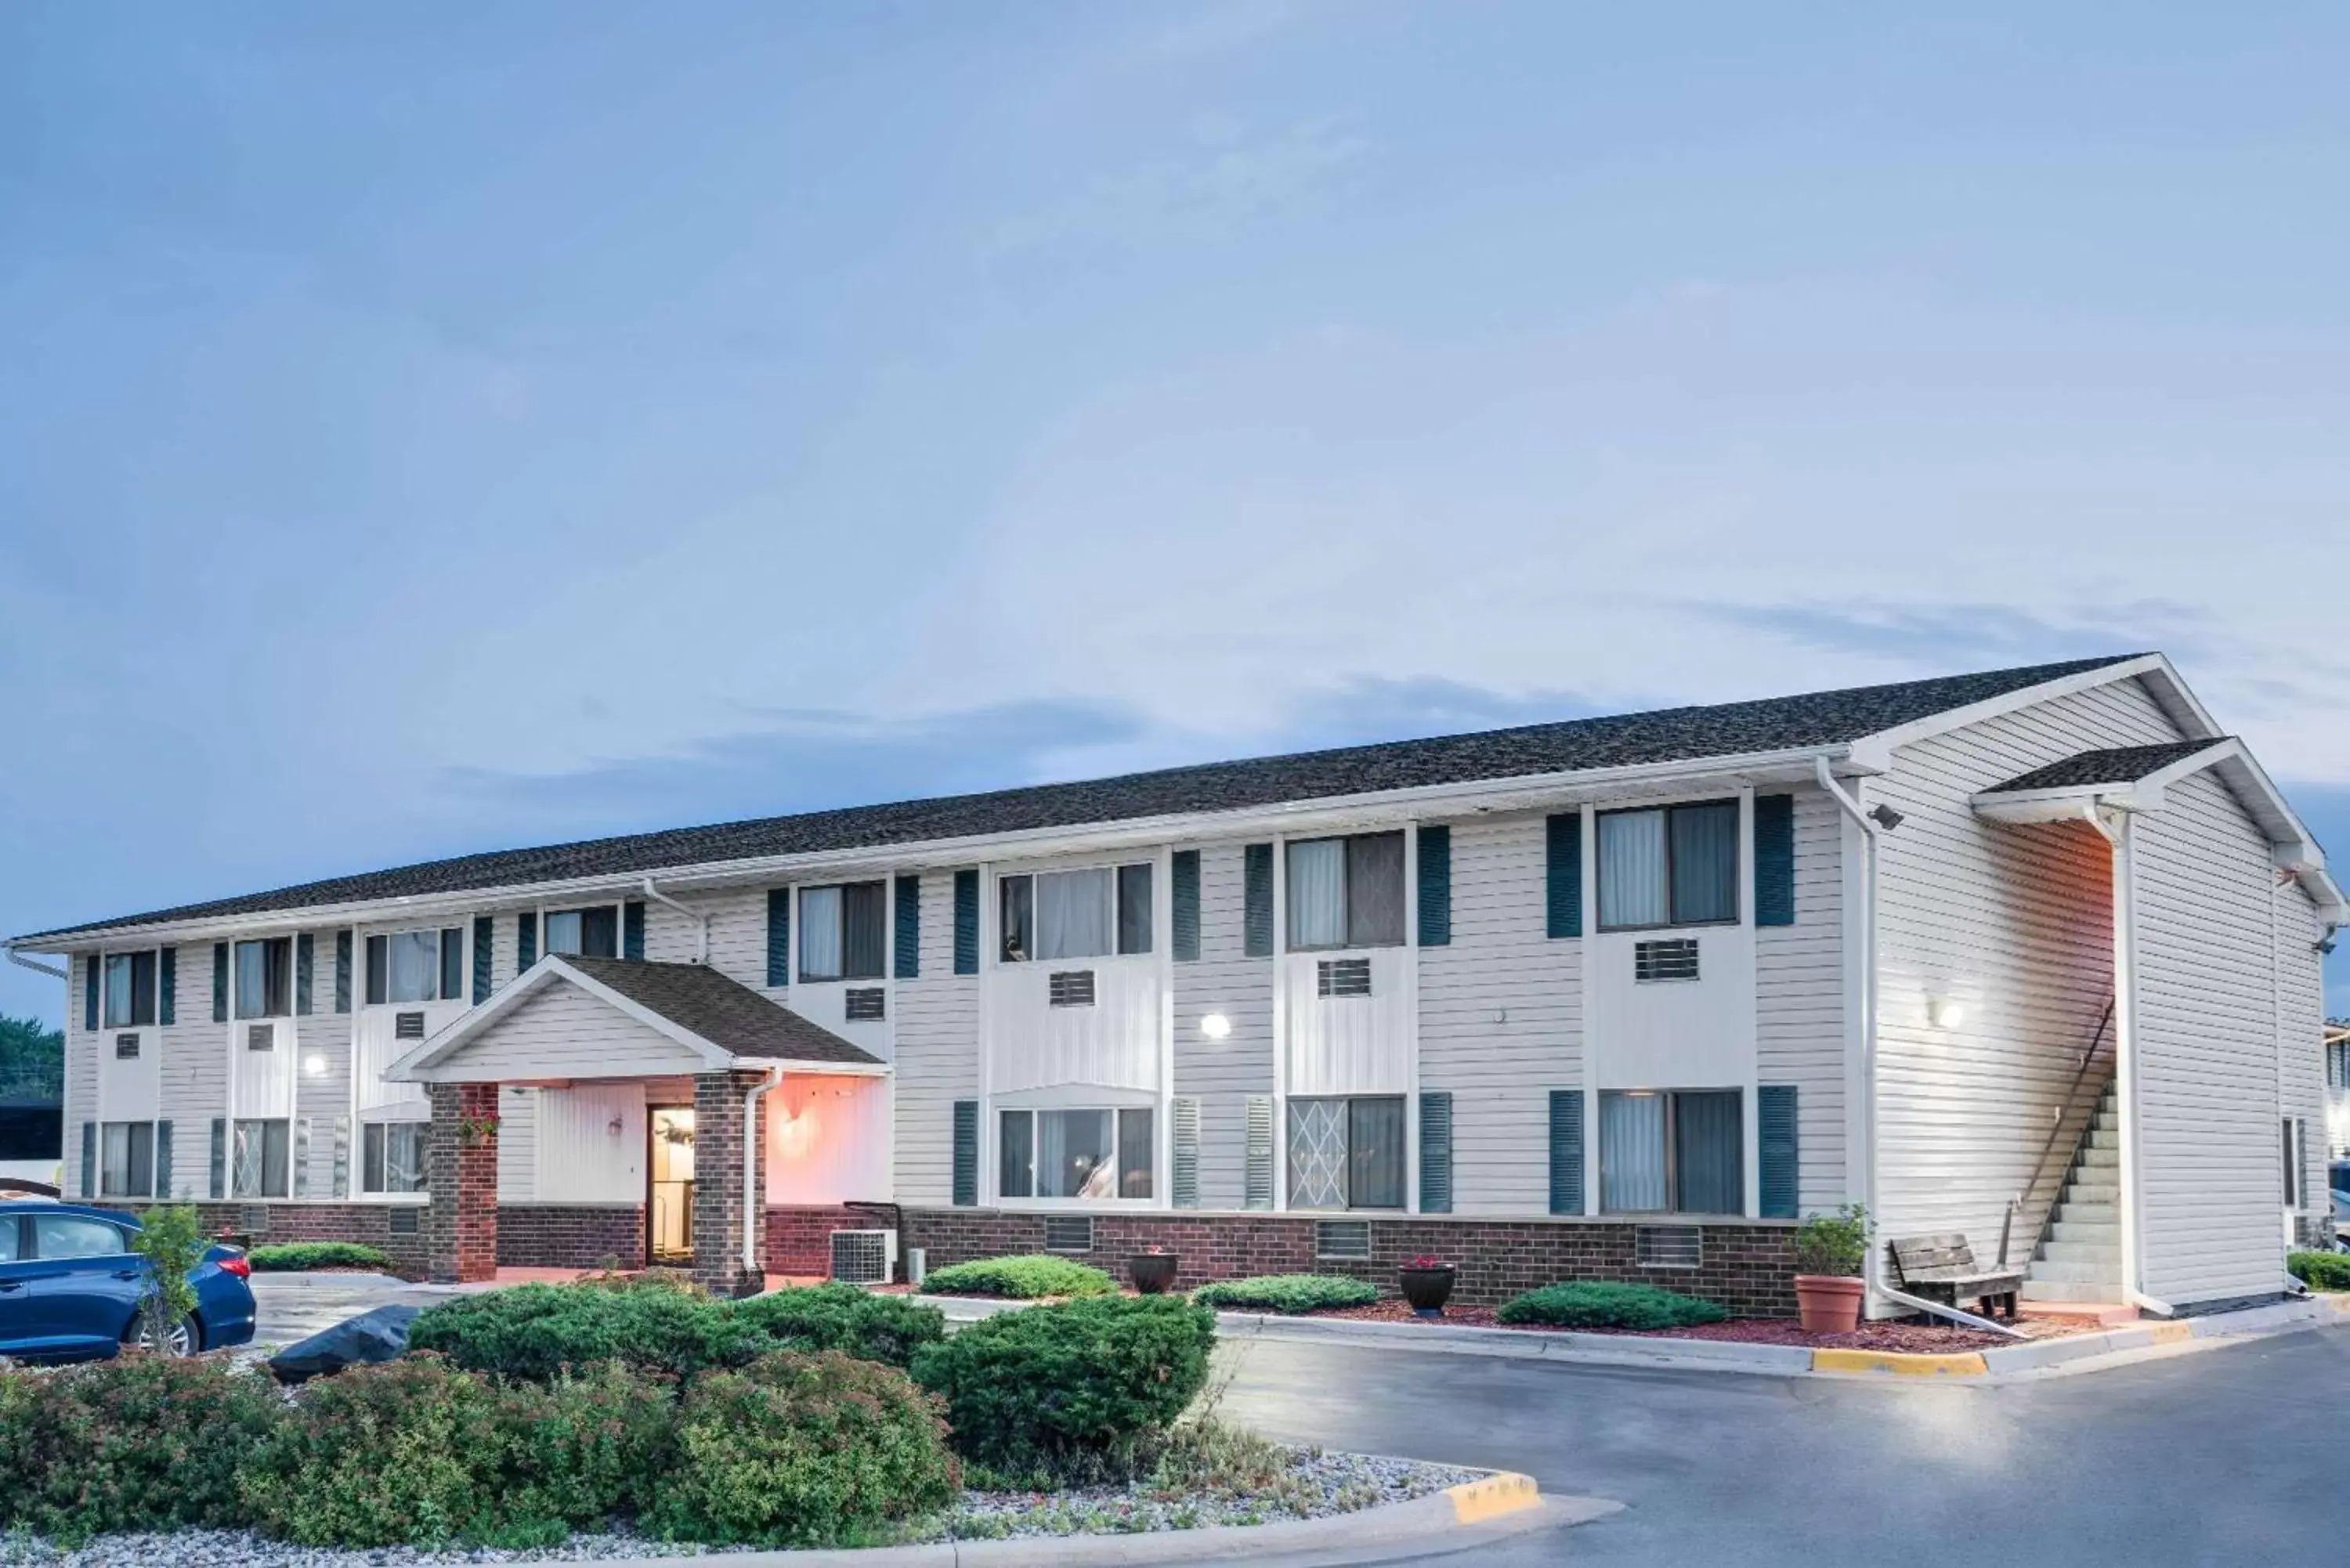 Property Building in Super 8 by Wyndham Tomah Wisconsin